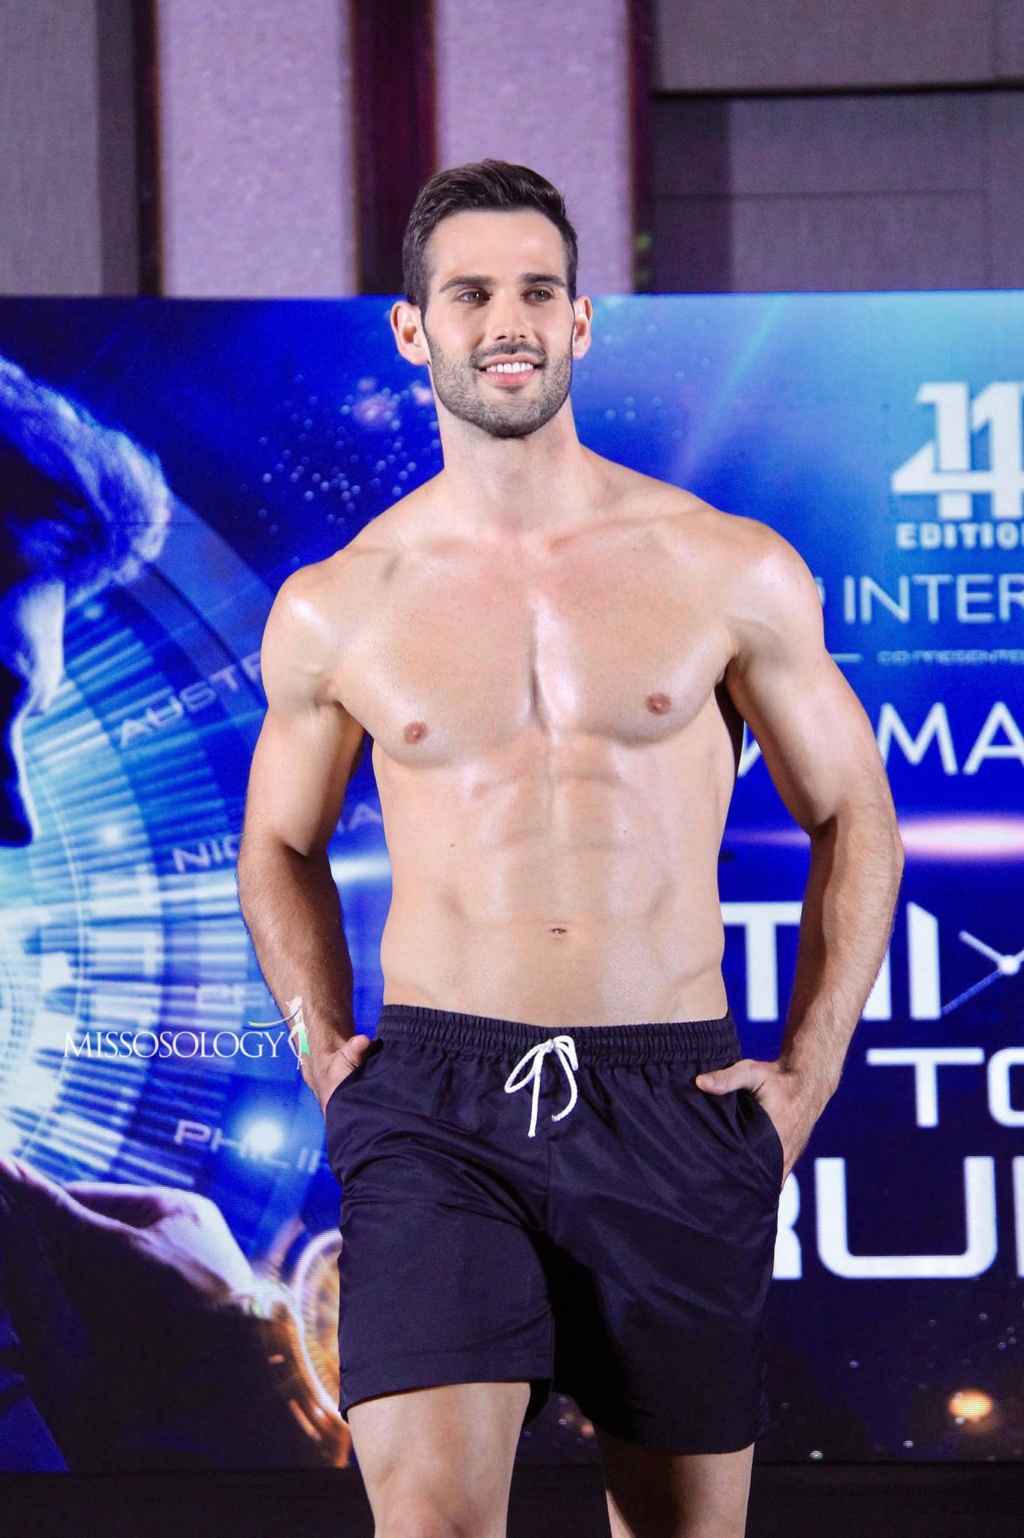 14th Mister International in Manila, Philippines - Oct 30th, 2022 - Winner is Dominican Republic 31280911